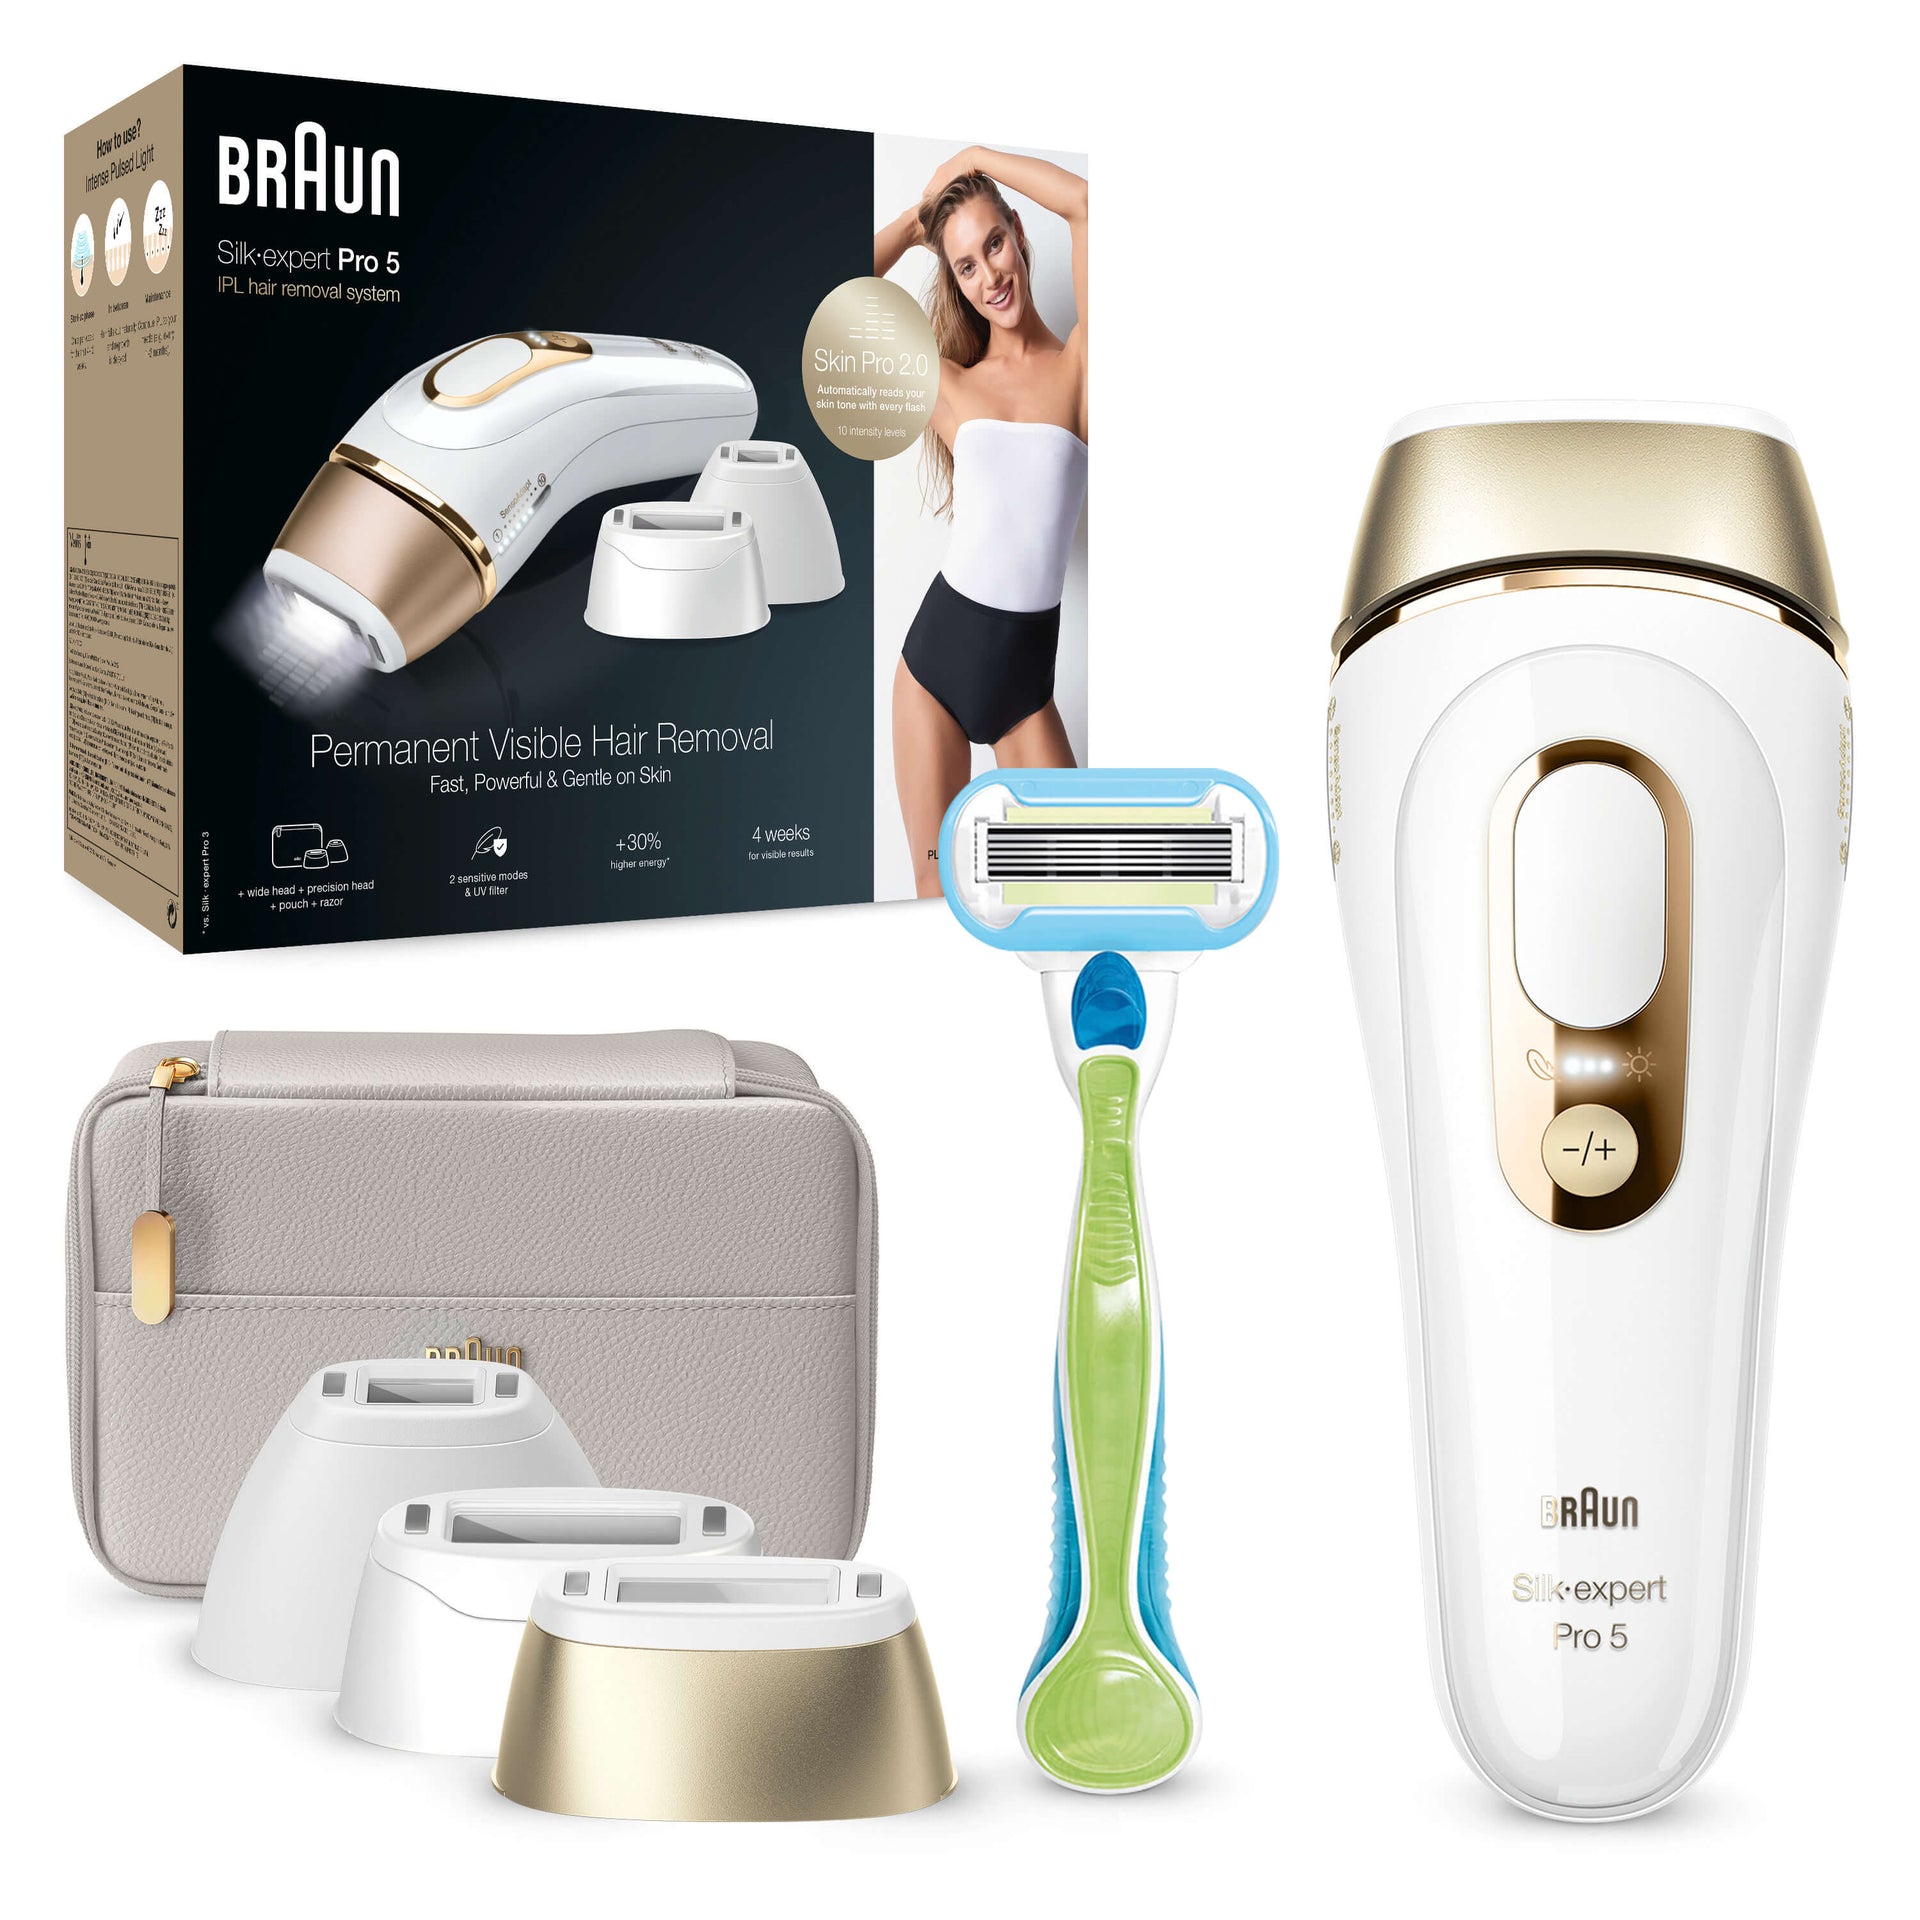 Review: Braun Silk-Expert IPL tested for permanent hair removal on